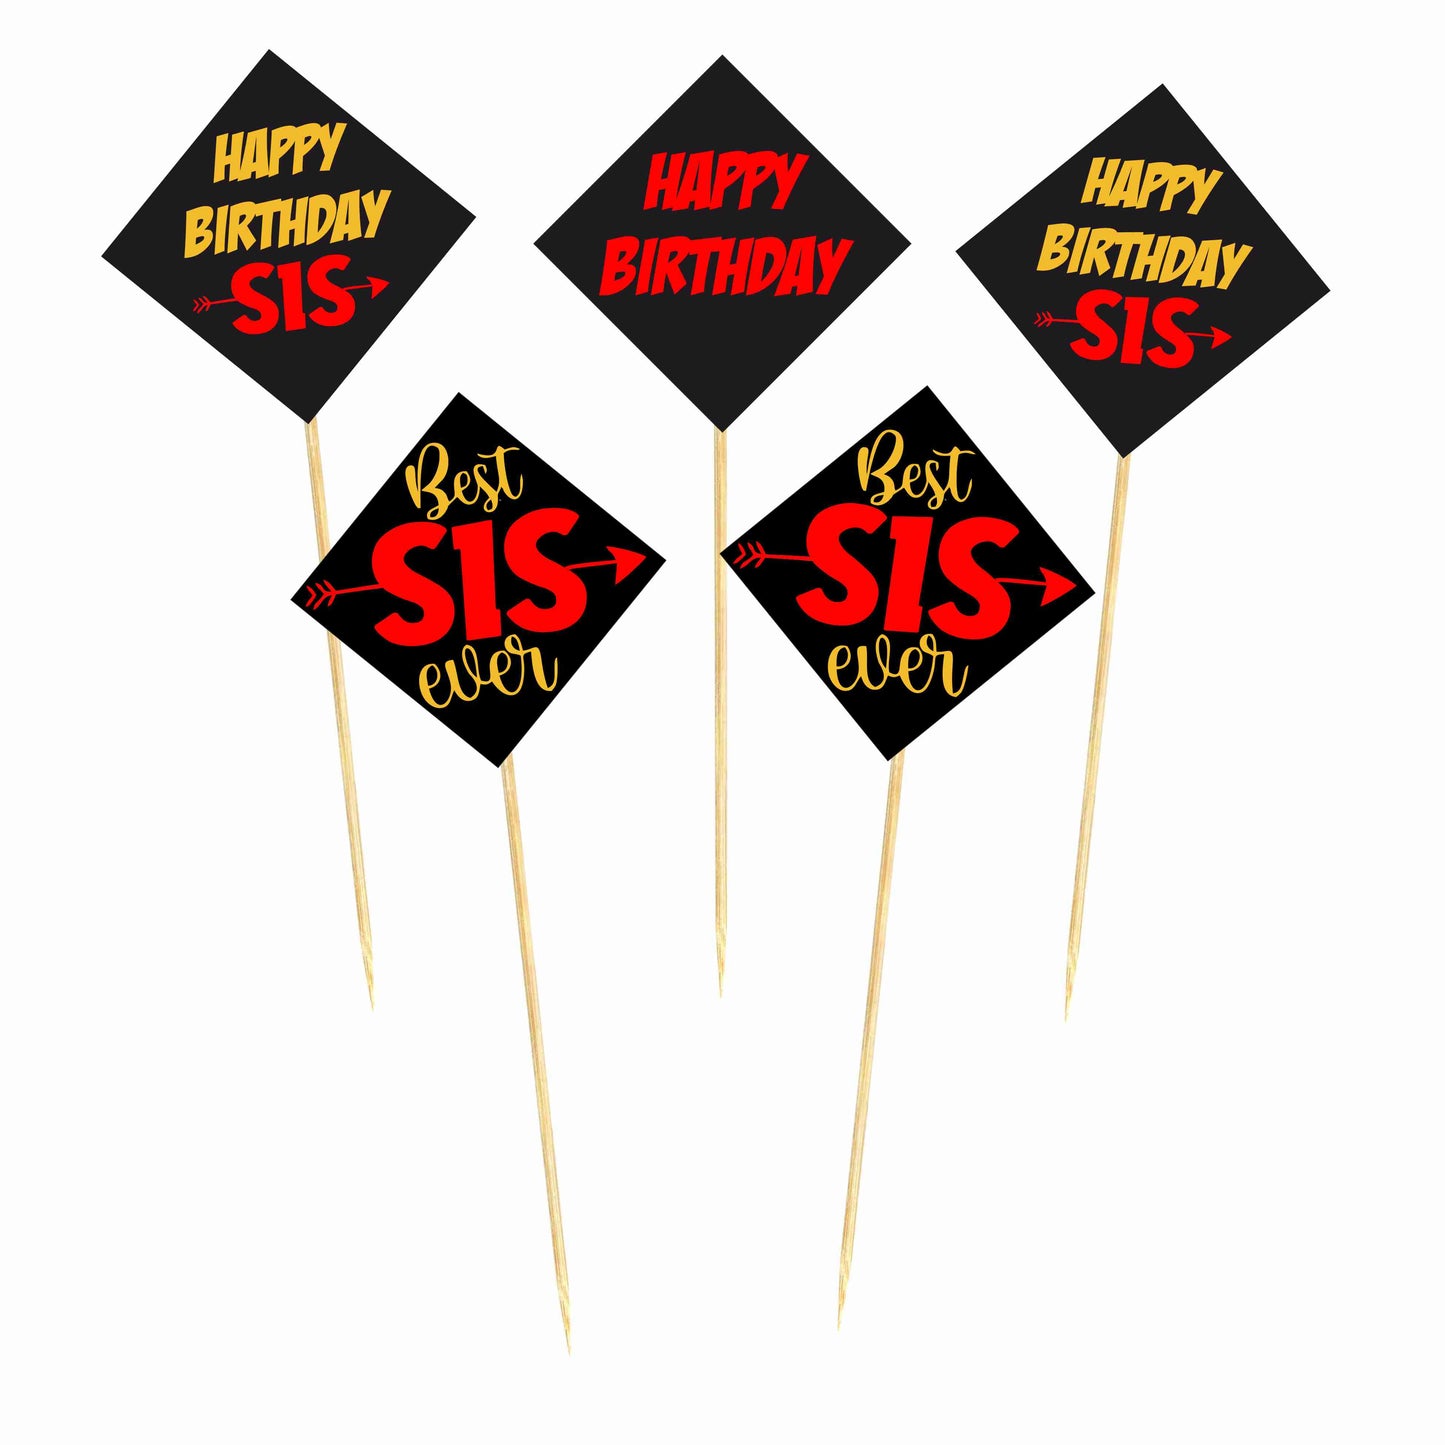 Happy Birthday Sis Cake Topper Pack of 10 Nos for Birthday Cake Decoration Theme Party Item